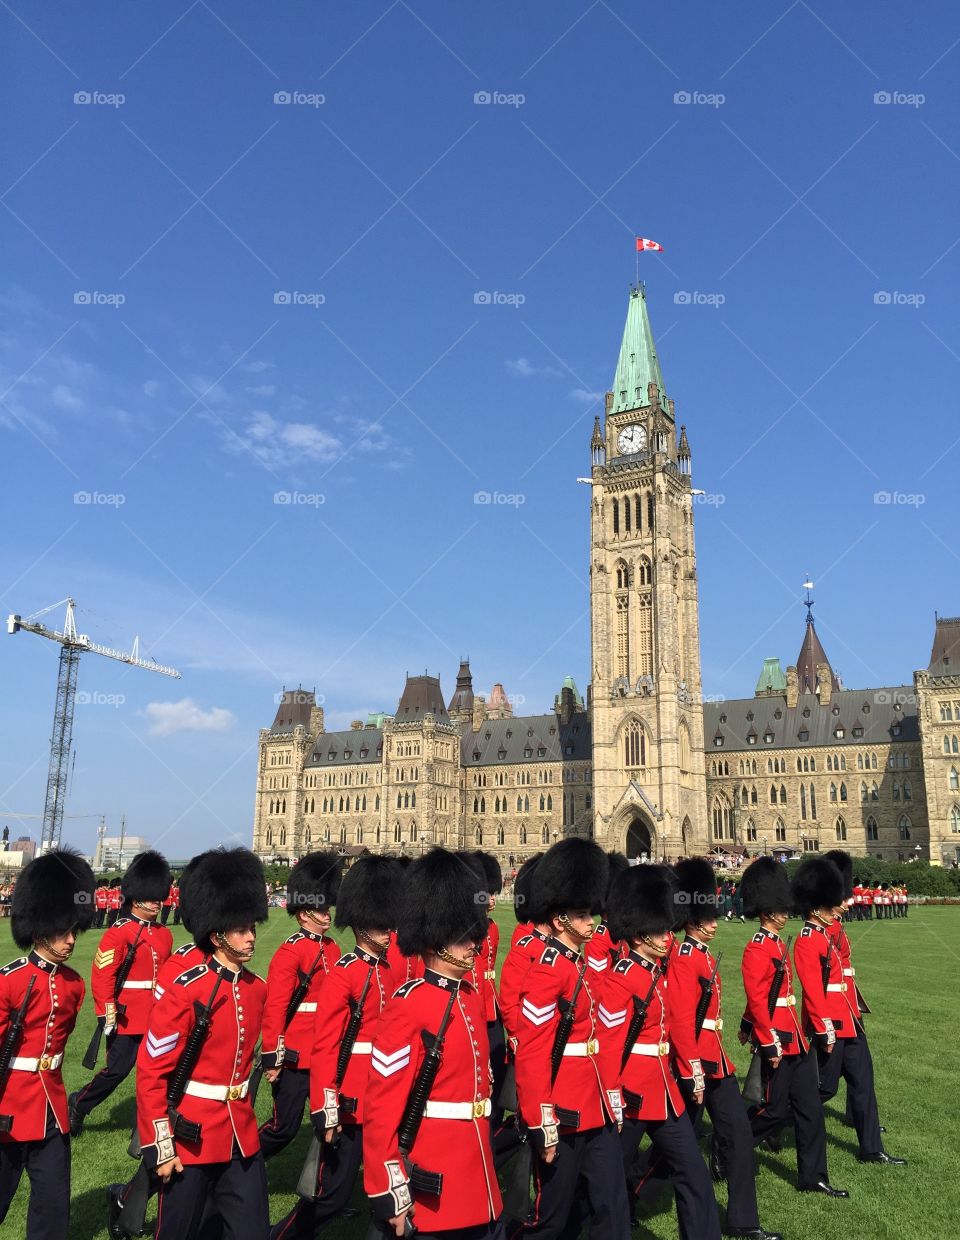 Parliament Hill - changing of the guards, Ottawa, Ontario 